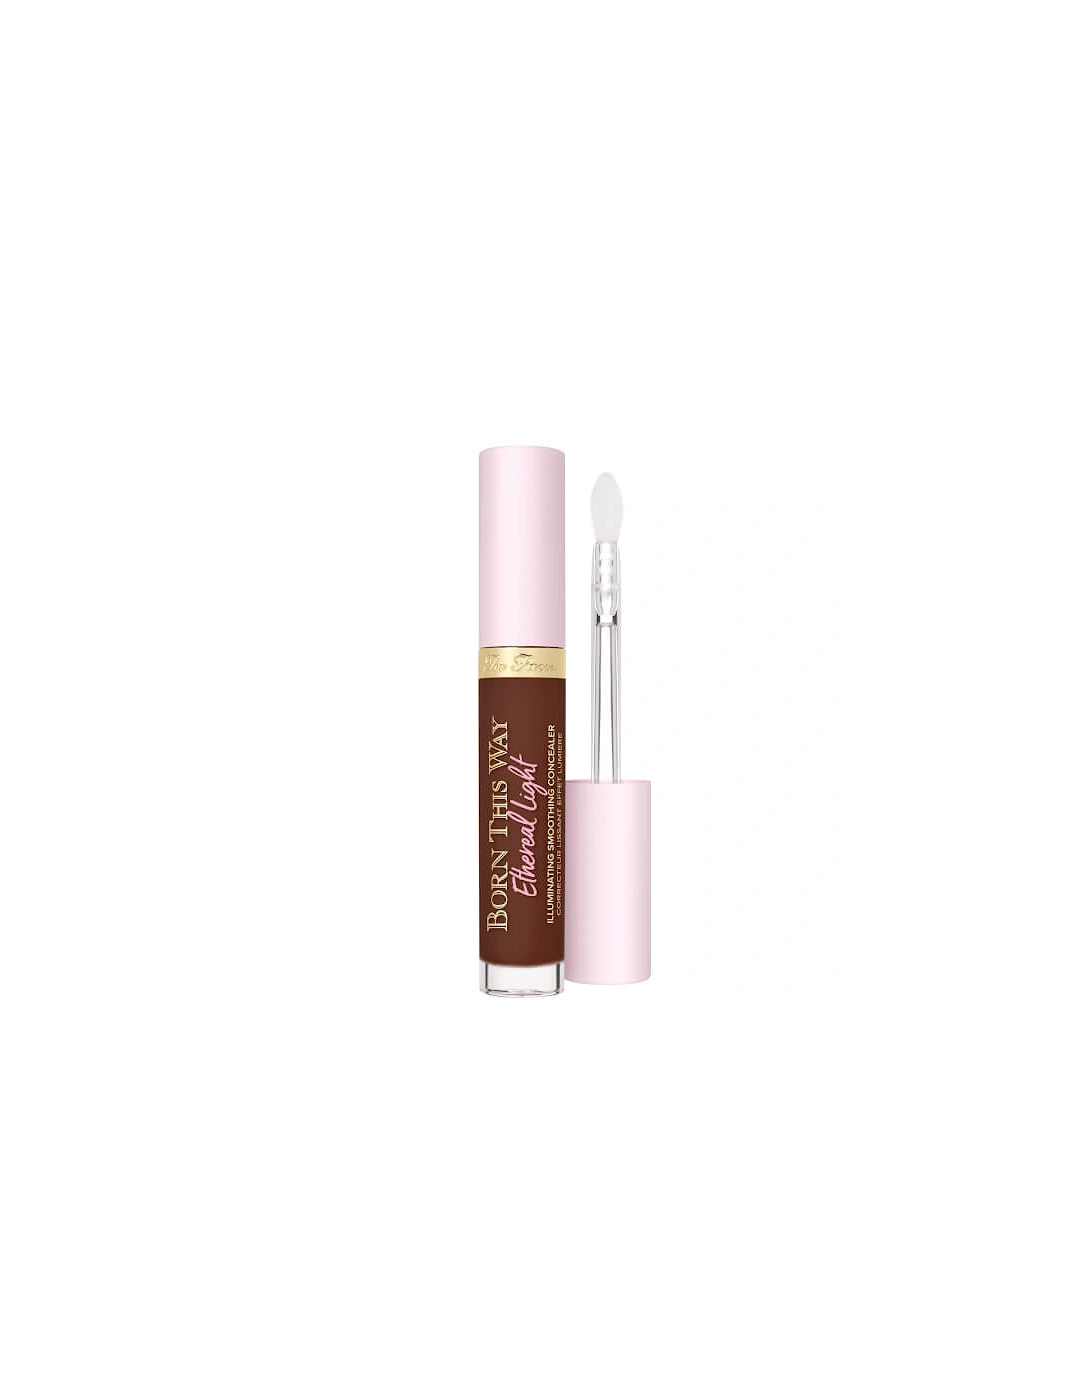 Born This Way Ethereal Light Illuminating Smoothing Concealer - Espresso, 2 of 1